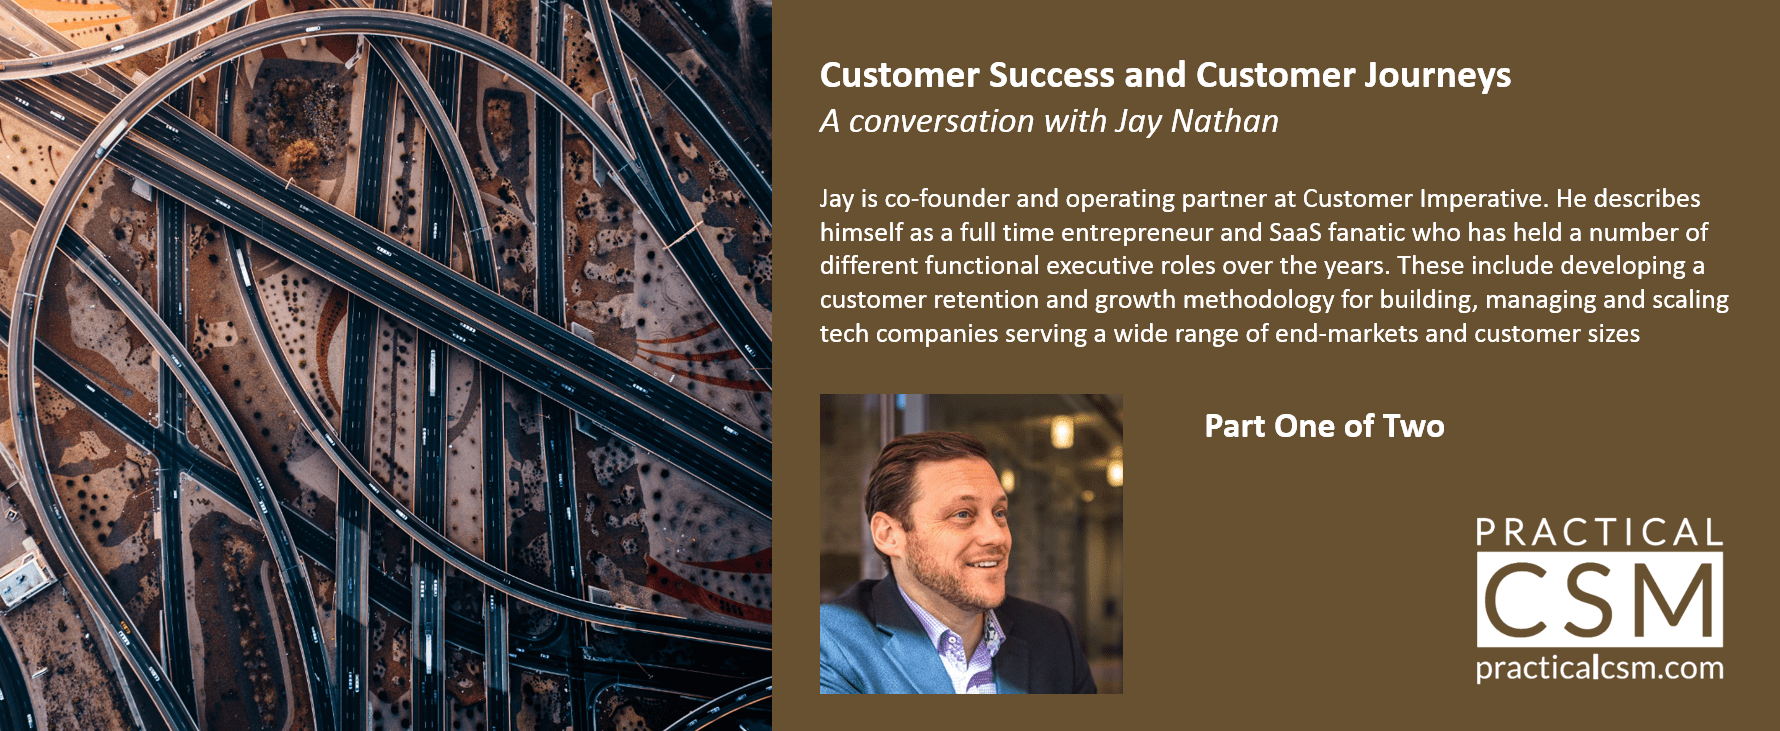 Practical CSM Customer Success and Customer Journey with Jay Nathan part 1